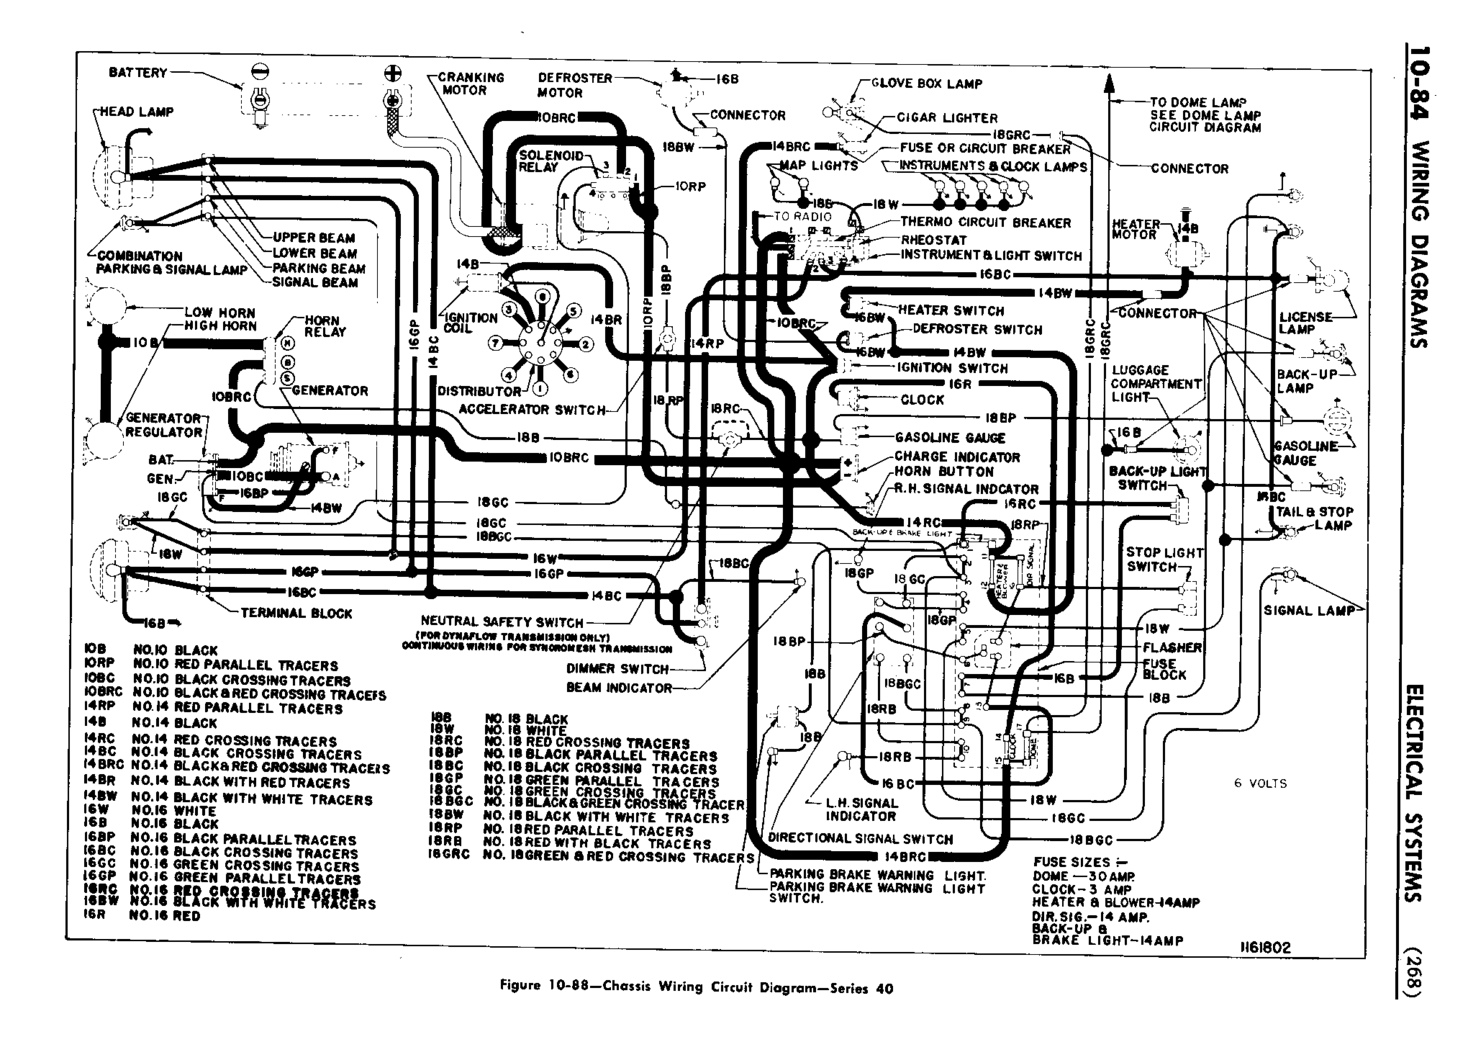 n_11 1953 Buick Shop Manual - Electrical Systems-085-085.jpg